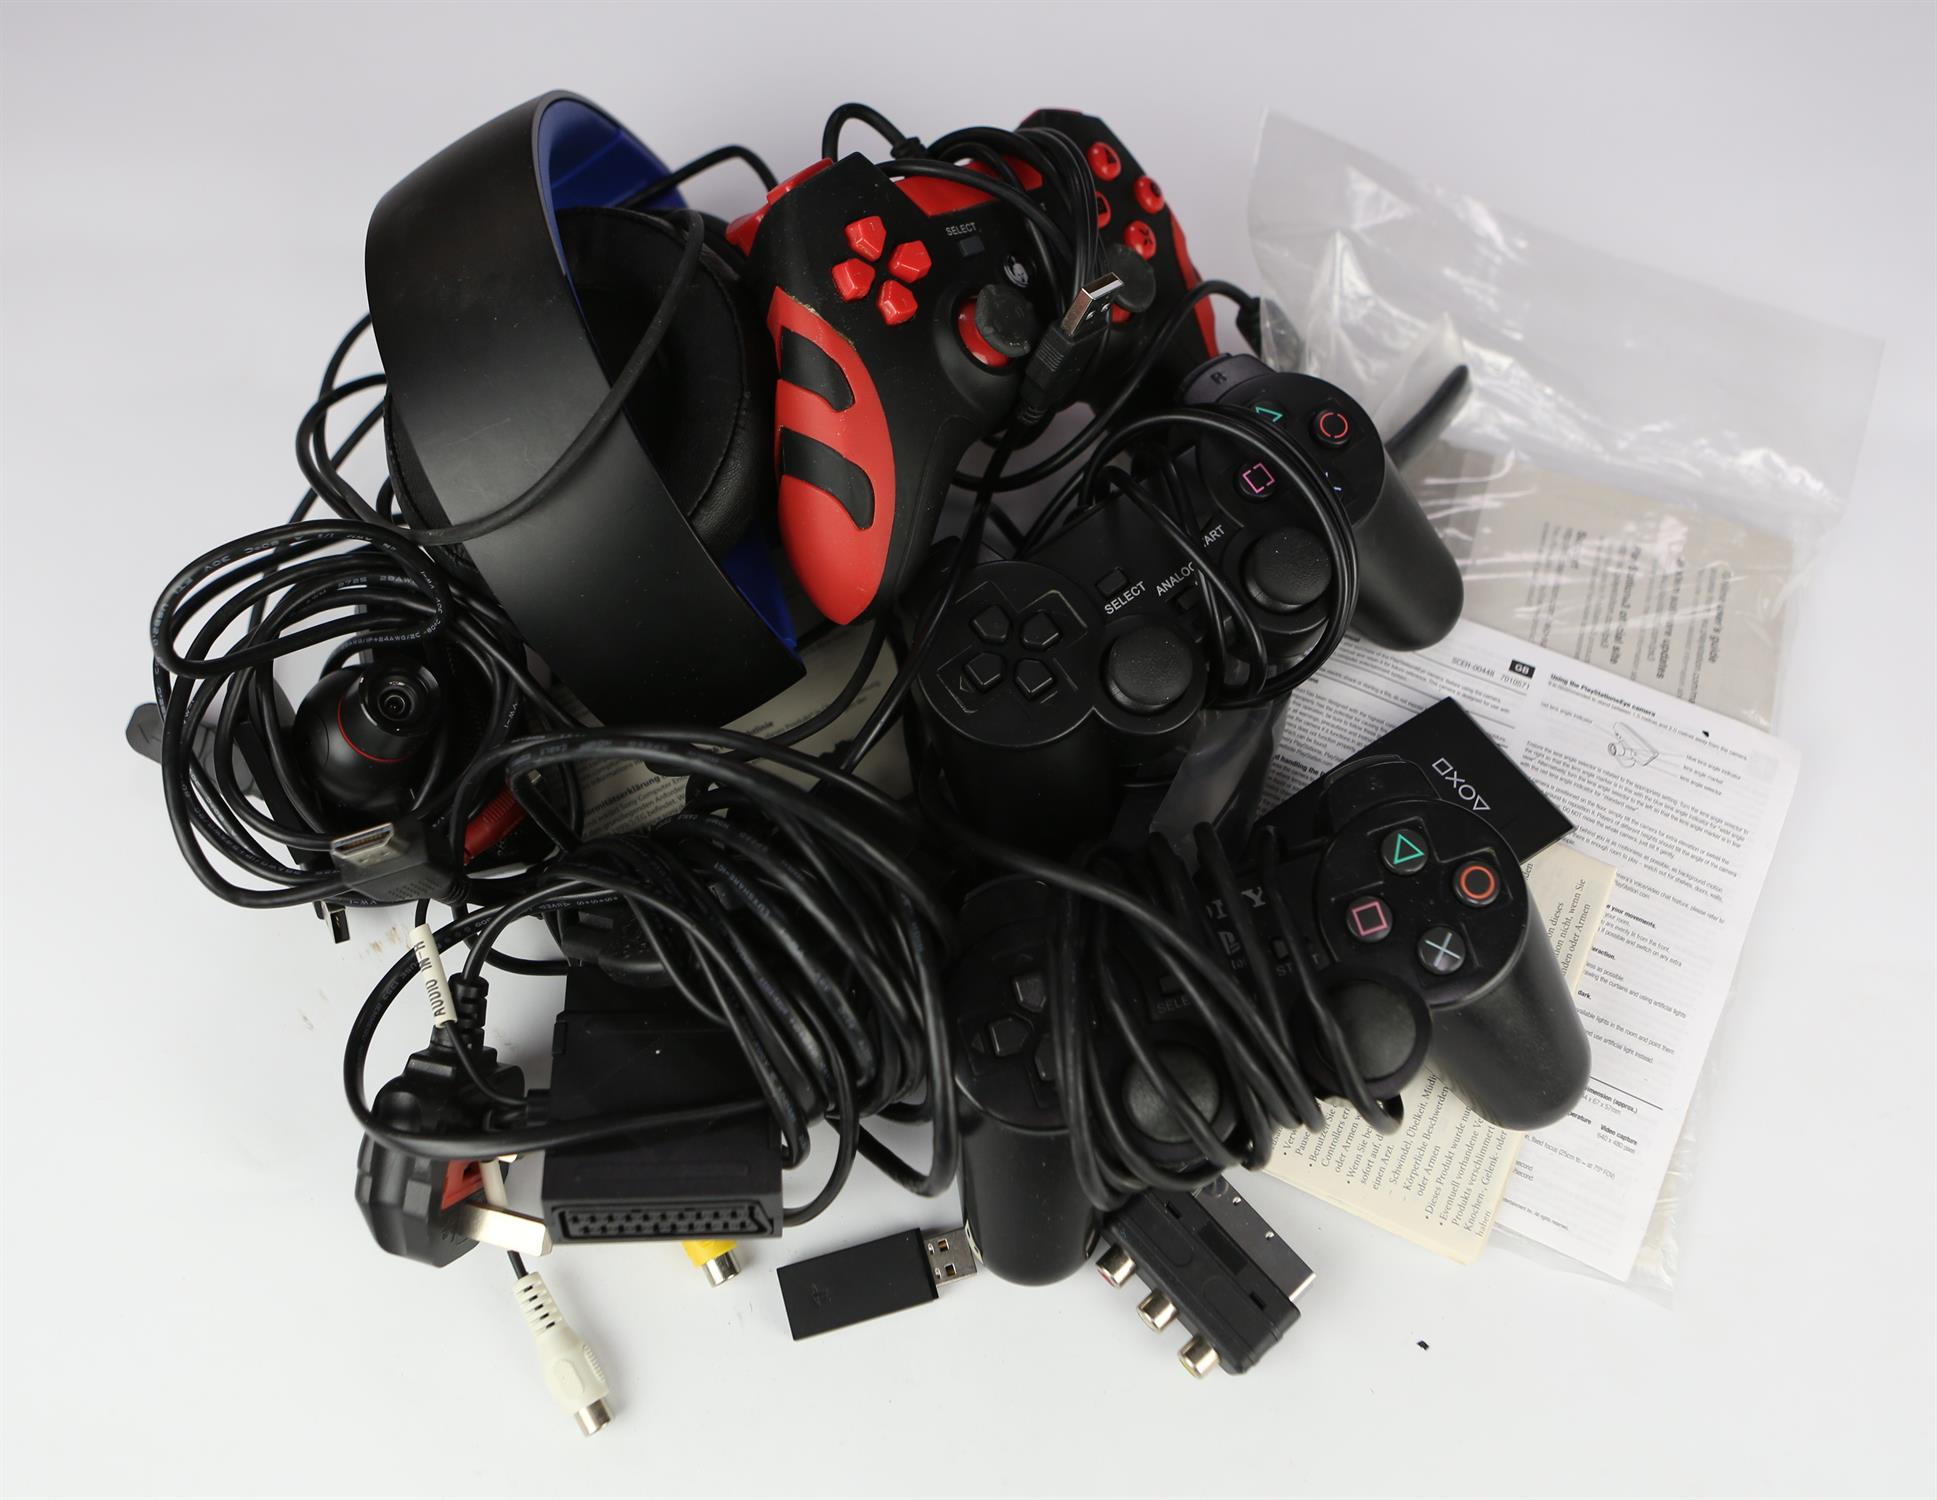 An assortment of controllers, cables and accessories for PlayStation consoles Includes: PS4